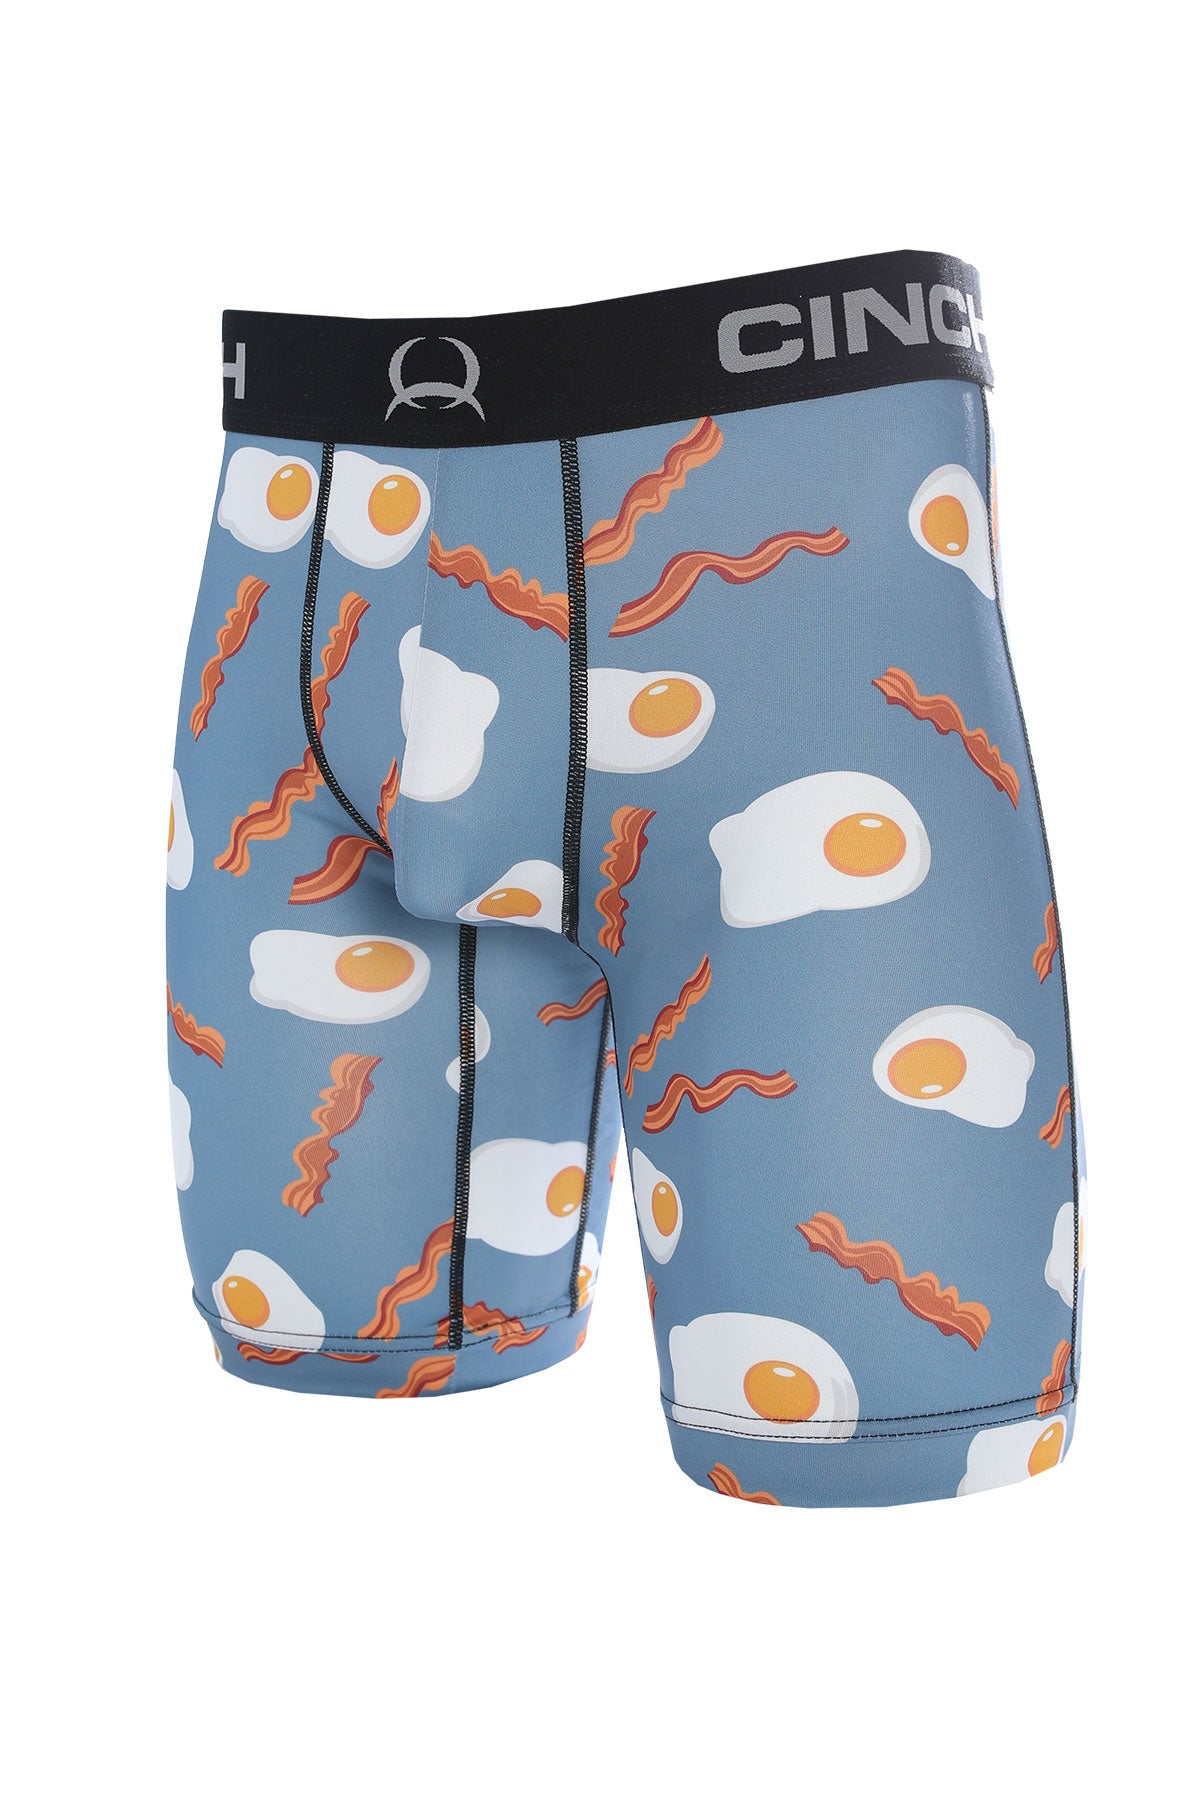 Bacon and Egg Briefs